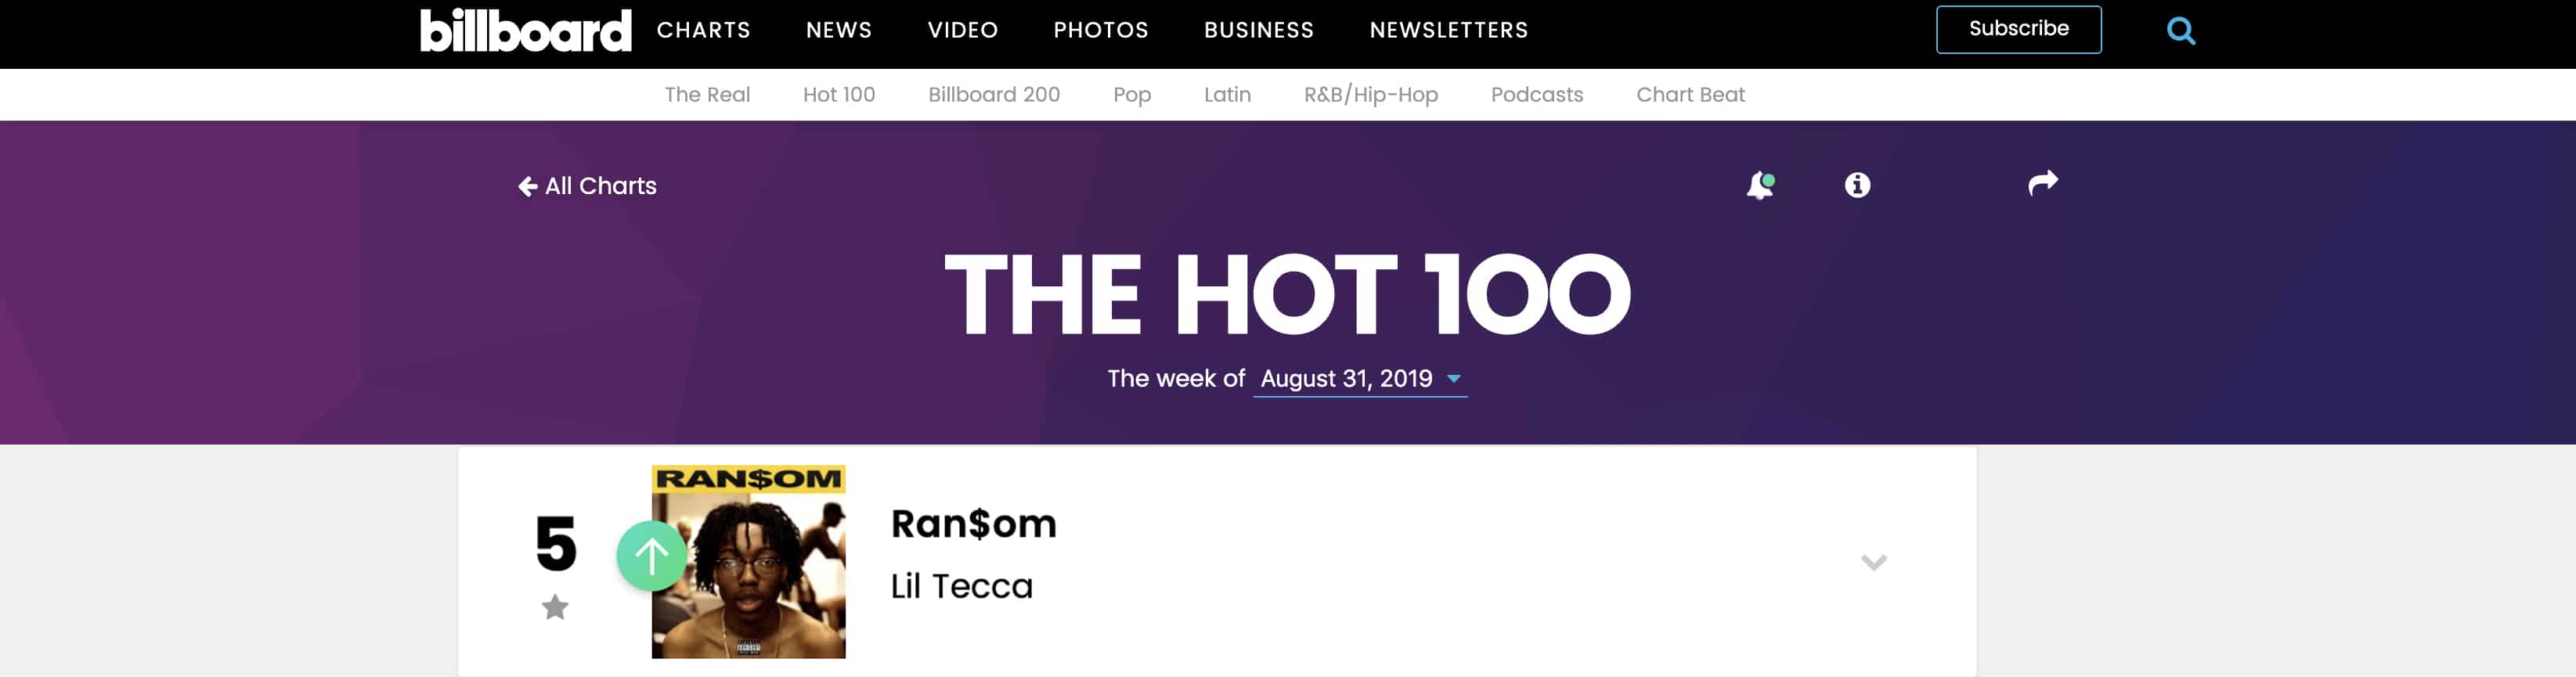 Lil Tecca Reaches The Billboard Hot 100 Top 5 With Ransom